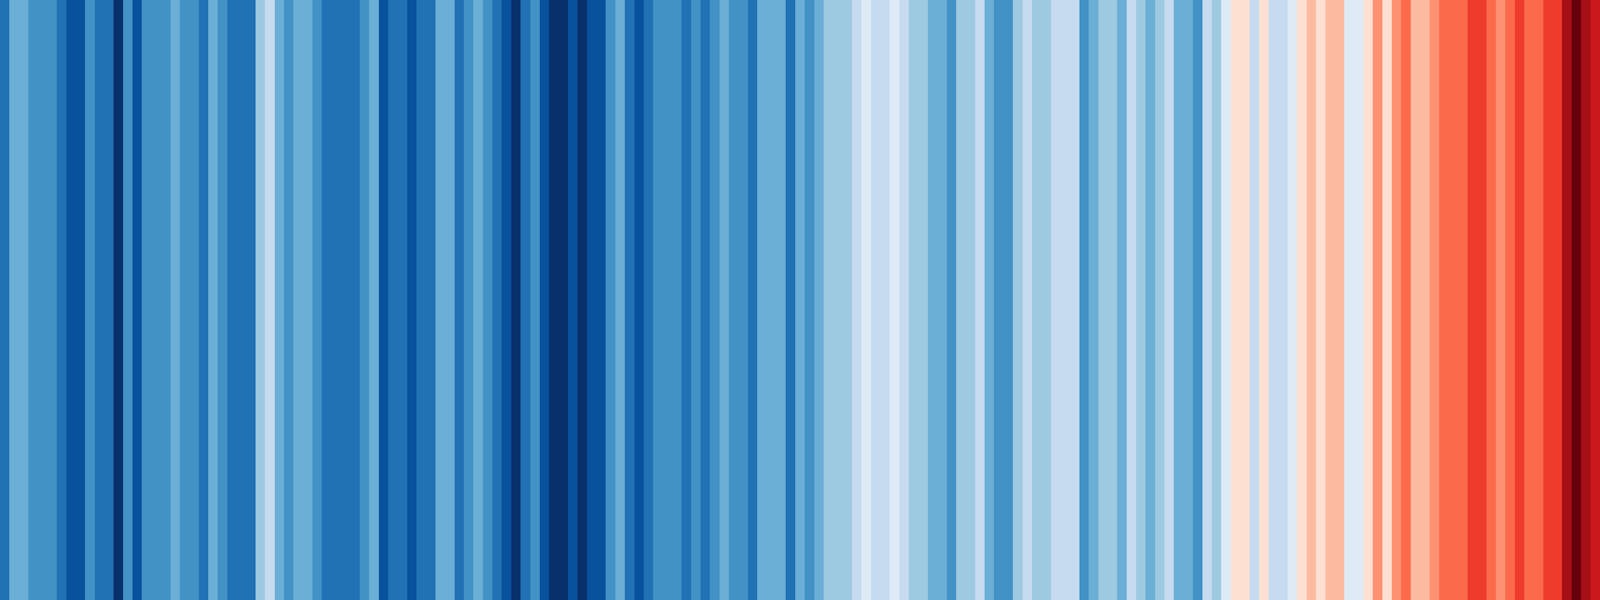 Climate Stripes: A Visual Guide